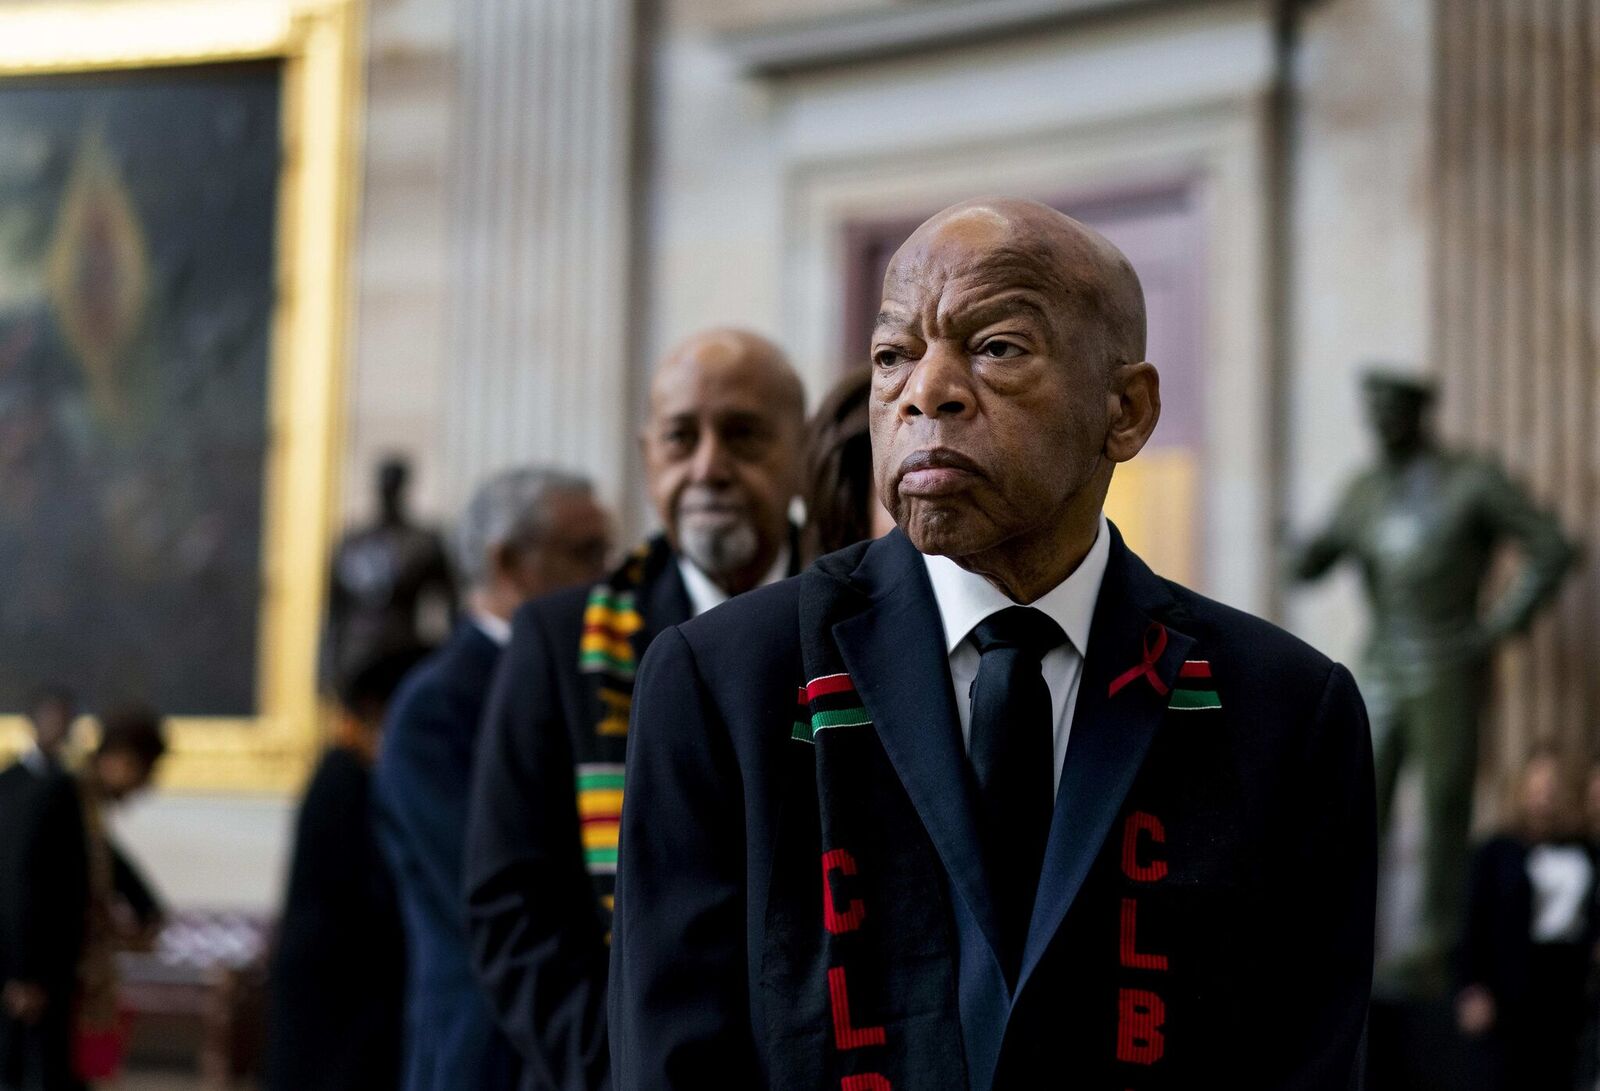 Rep. John Lewis prepares to pay his respects to Representative Elijah Cummings during a memorial ceremony on Capitol Hill in Washington, DC. | Source: Getty Images